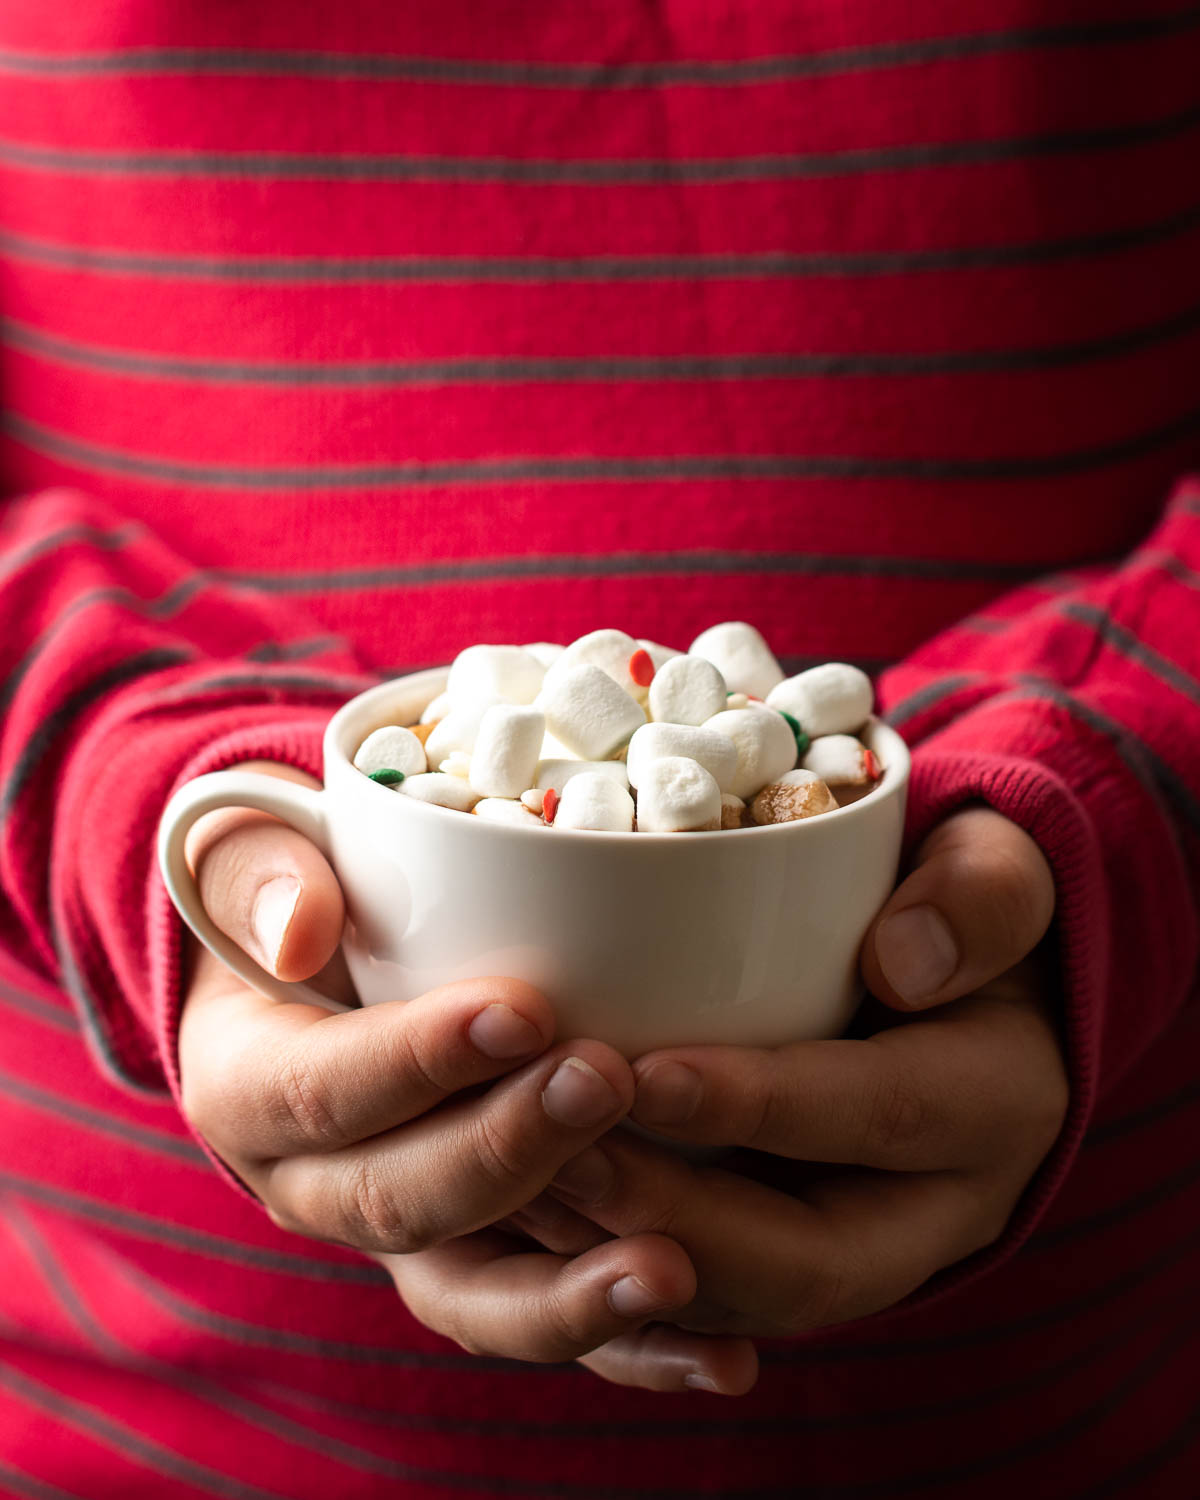 Child's hands holding a cup of hot chocolate with marshmallows.